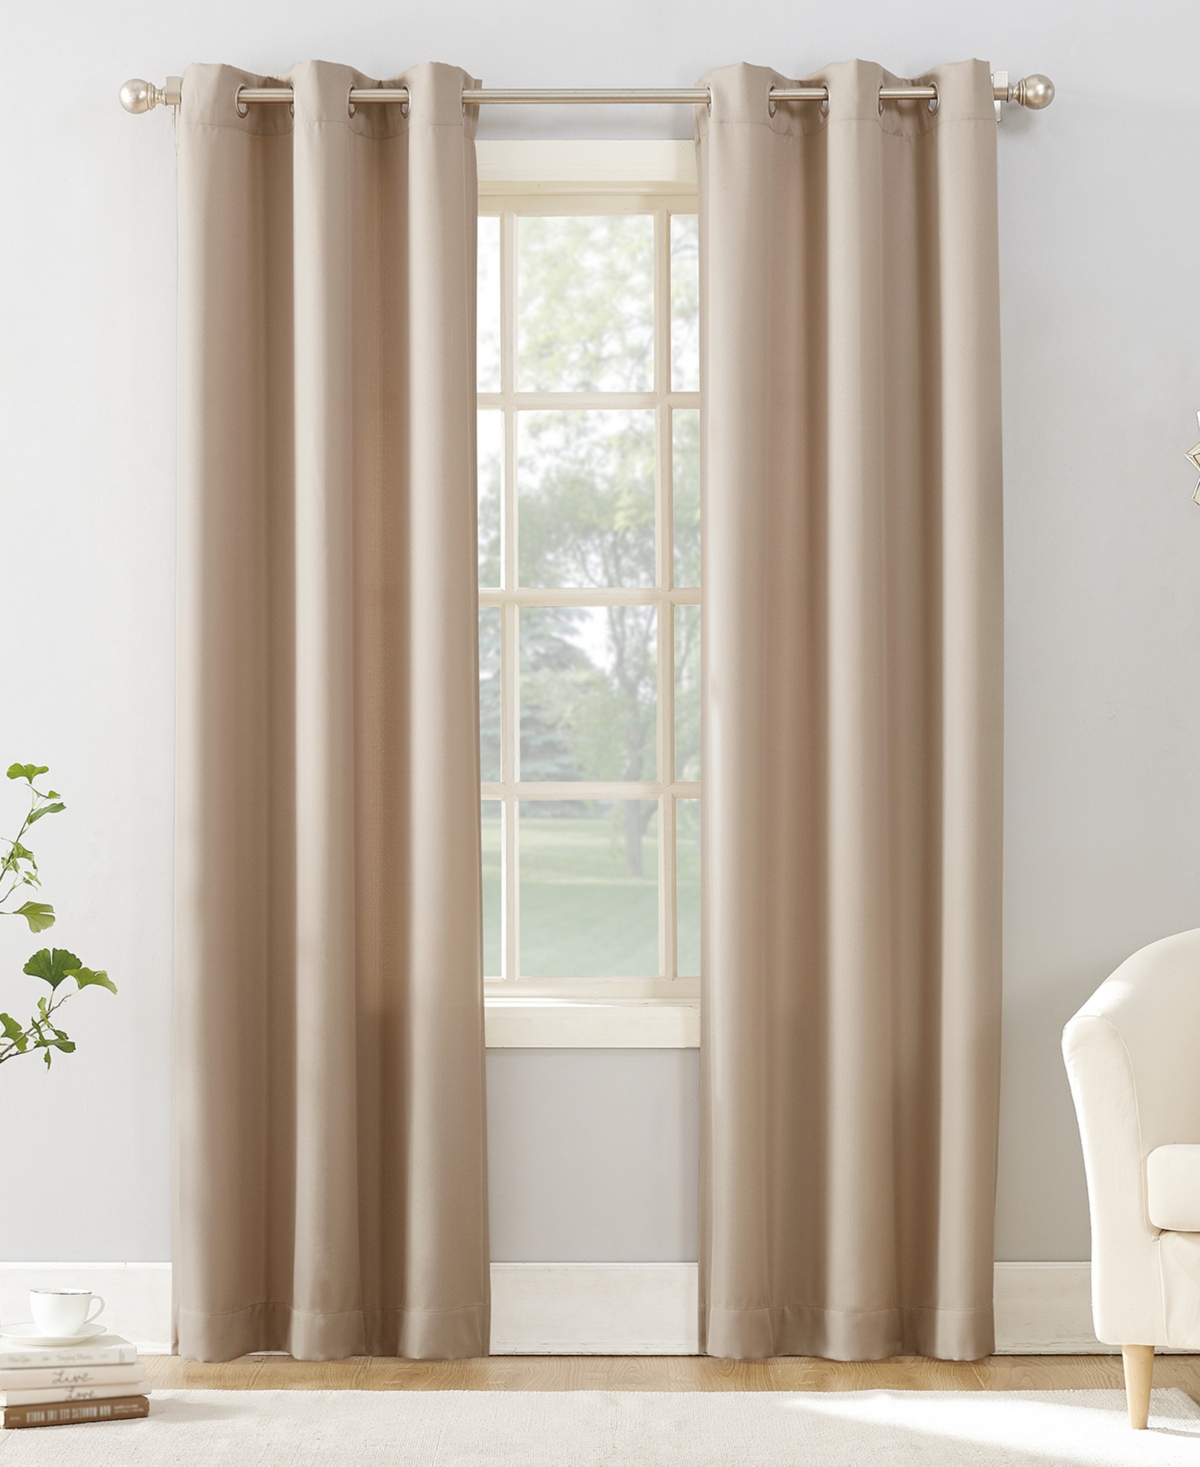 No. 918 Valerie Casual Textured Semi-sheer Grommet Curtain Panel, 40" X 95" In Oatmeal